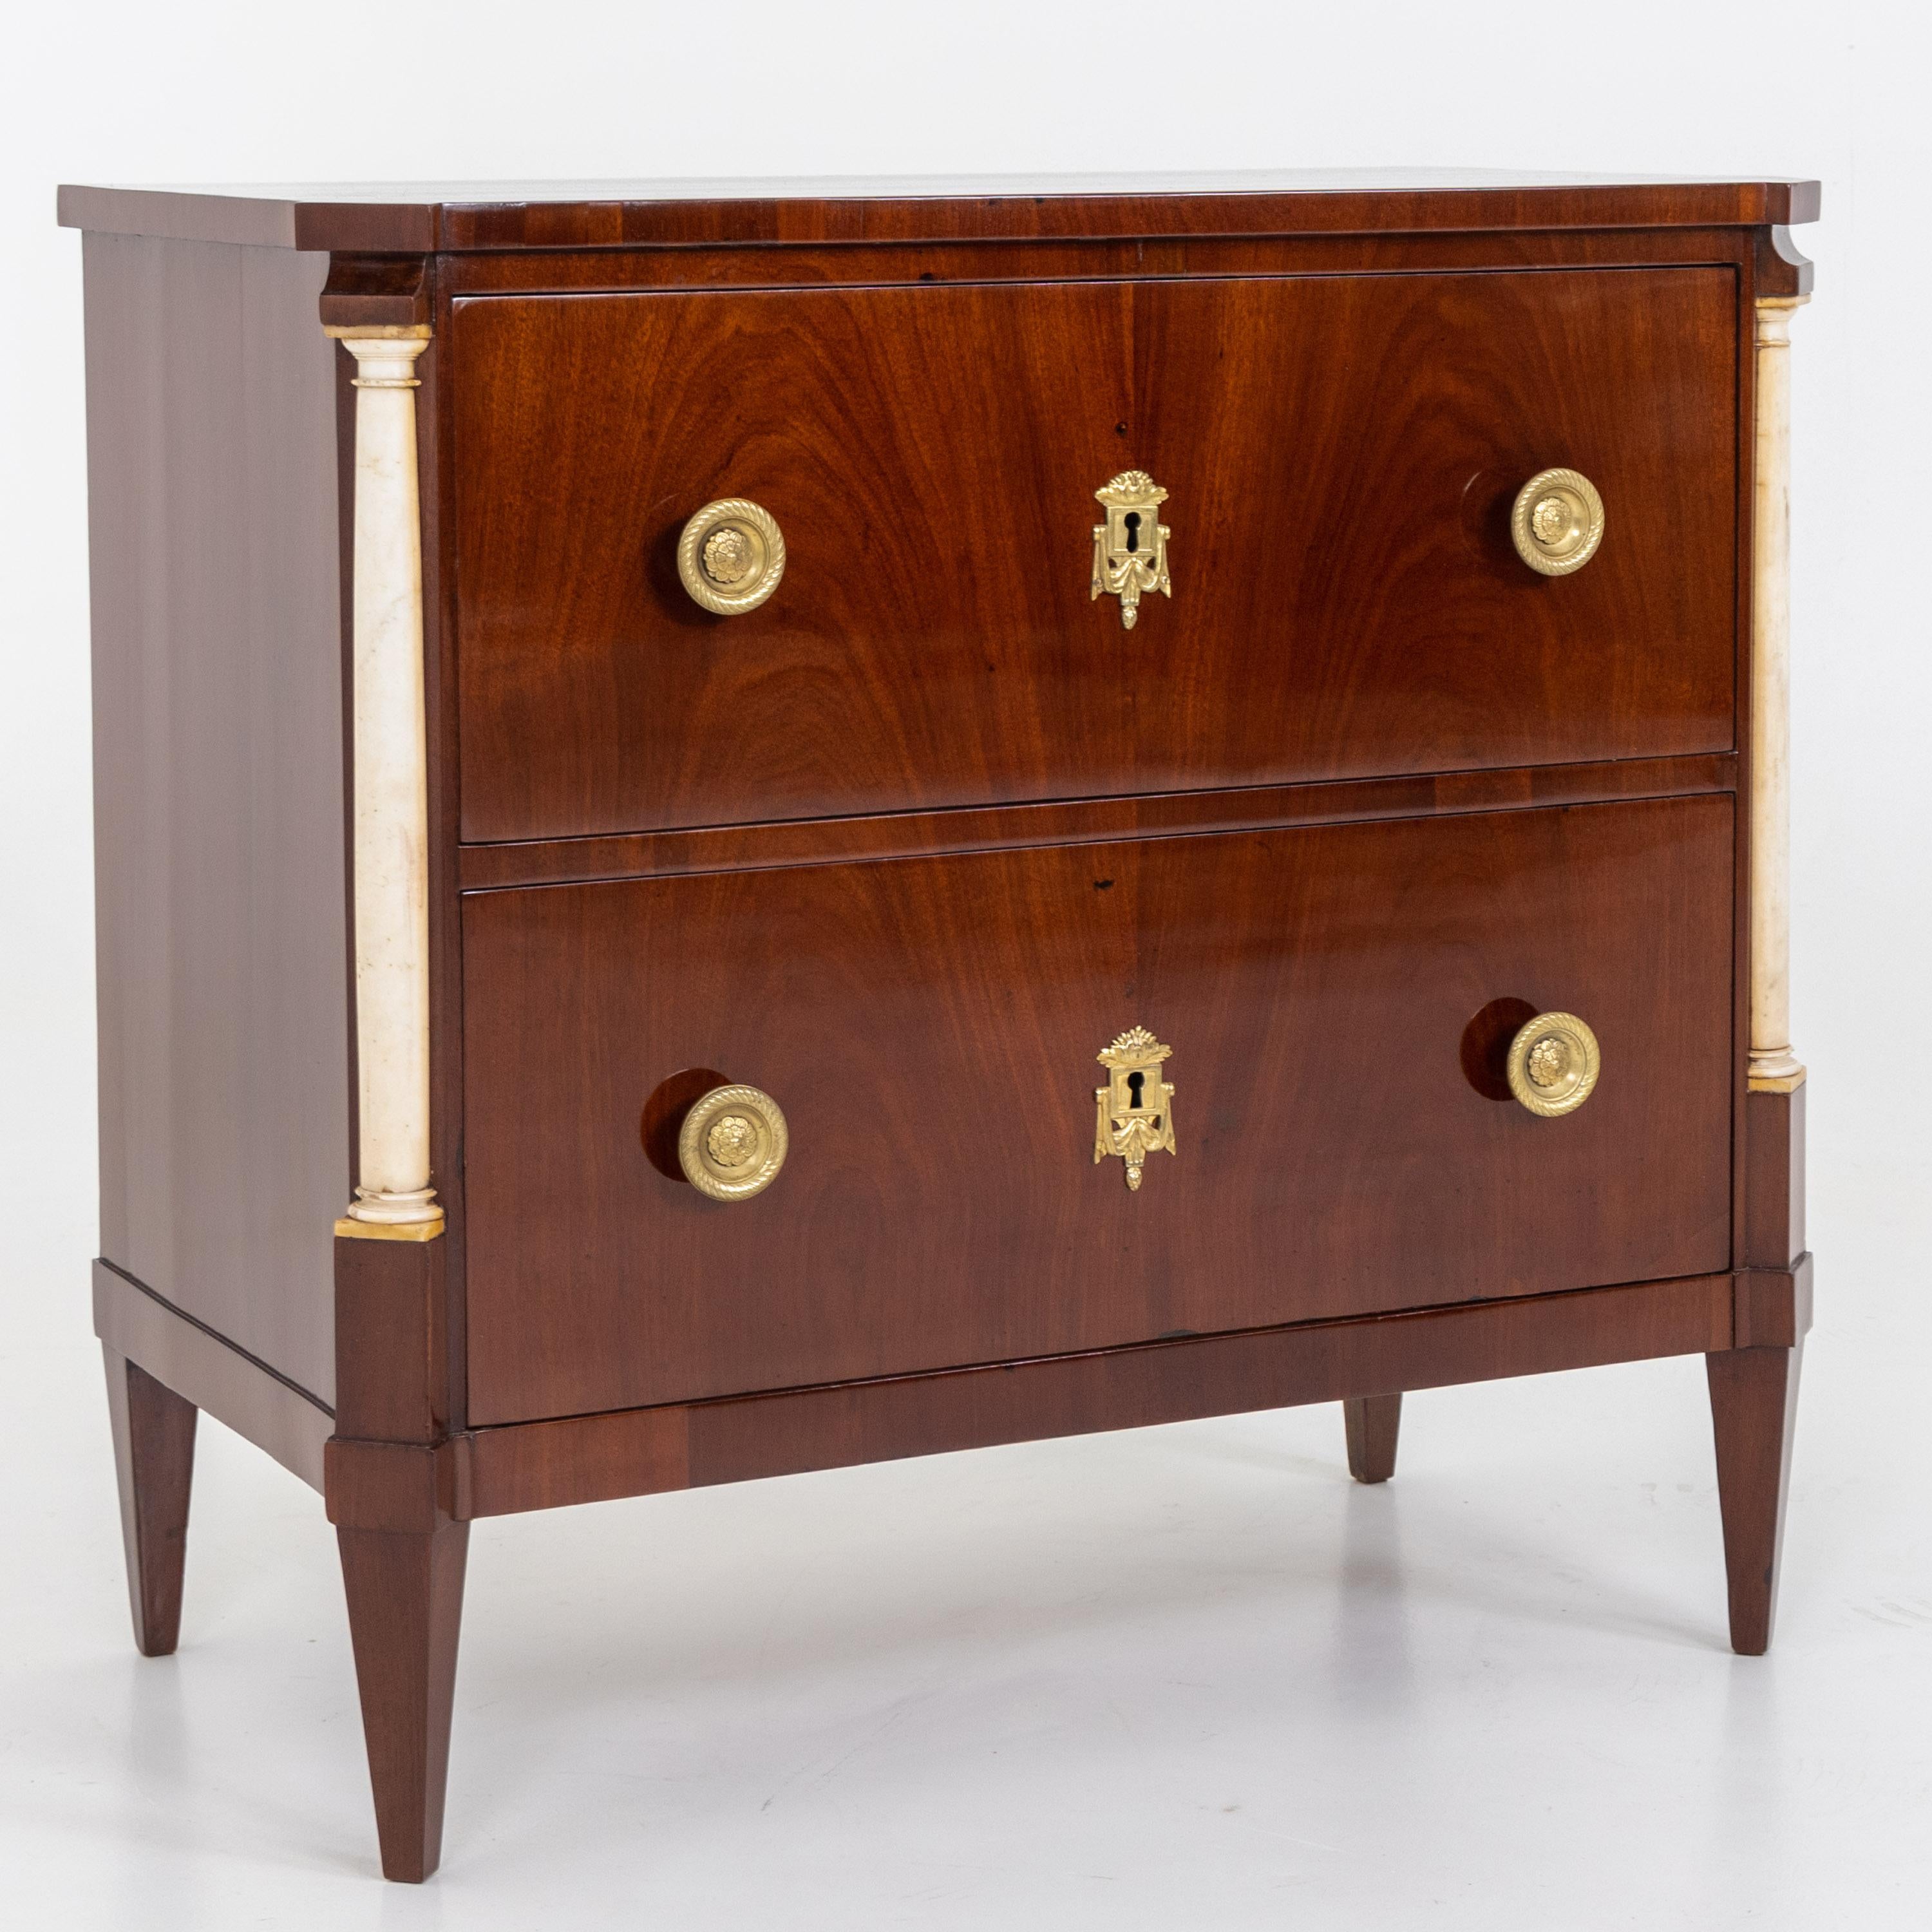 German Empire Chests of Drawers, Berlin, Early 19th Century For Sale